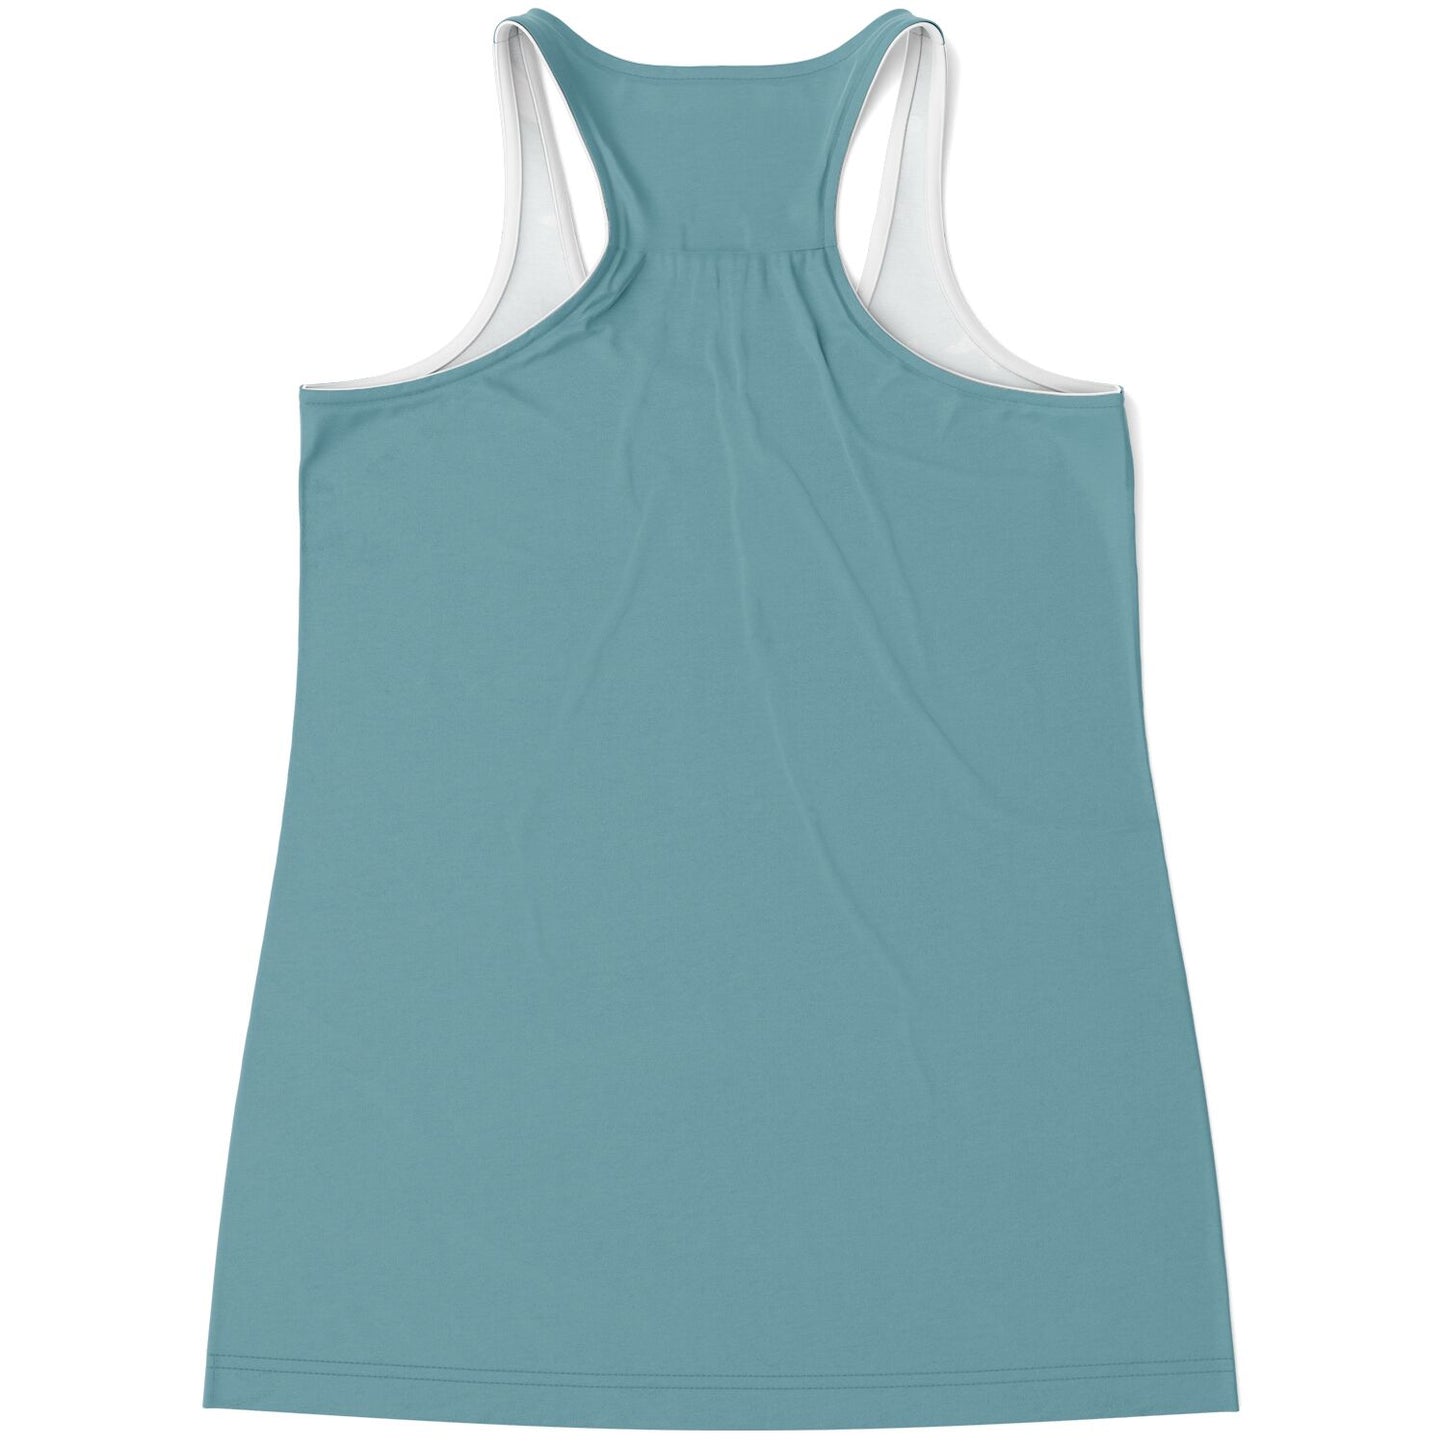 Sea Dolphins Tank Tops - Sport Finesse